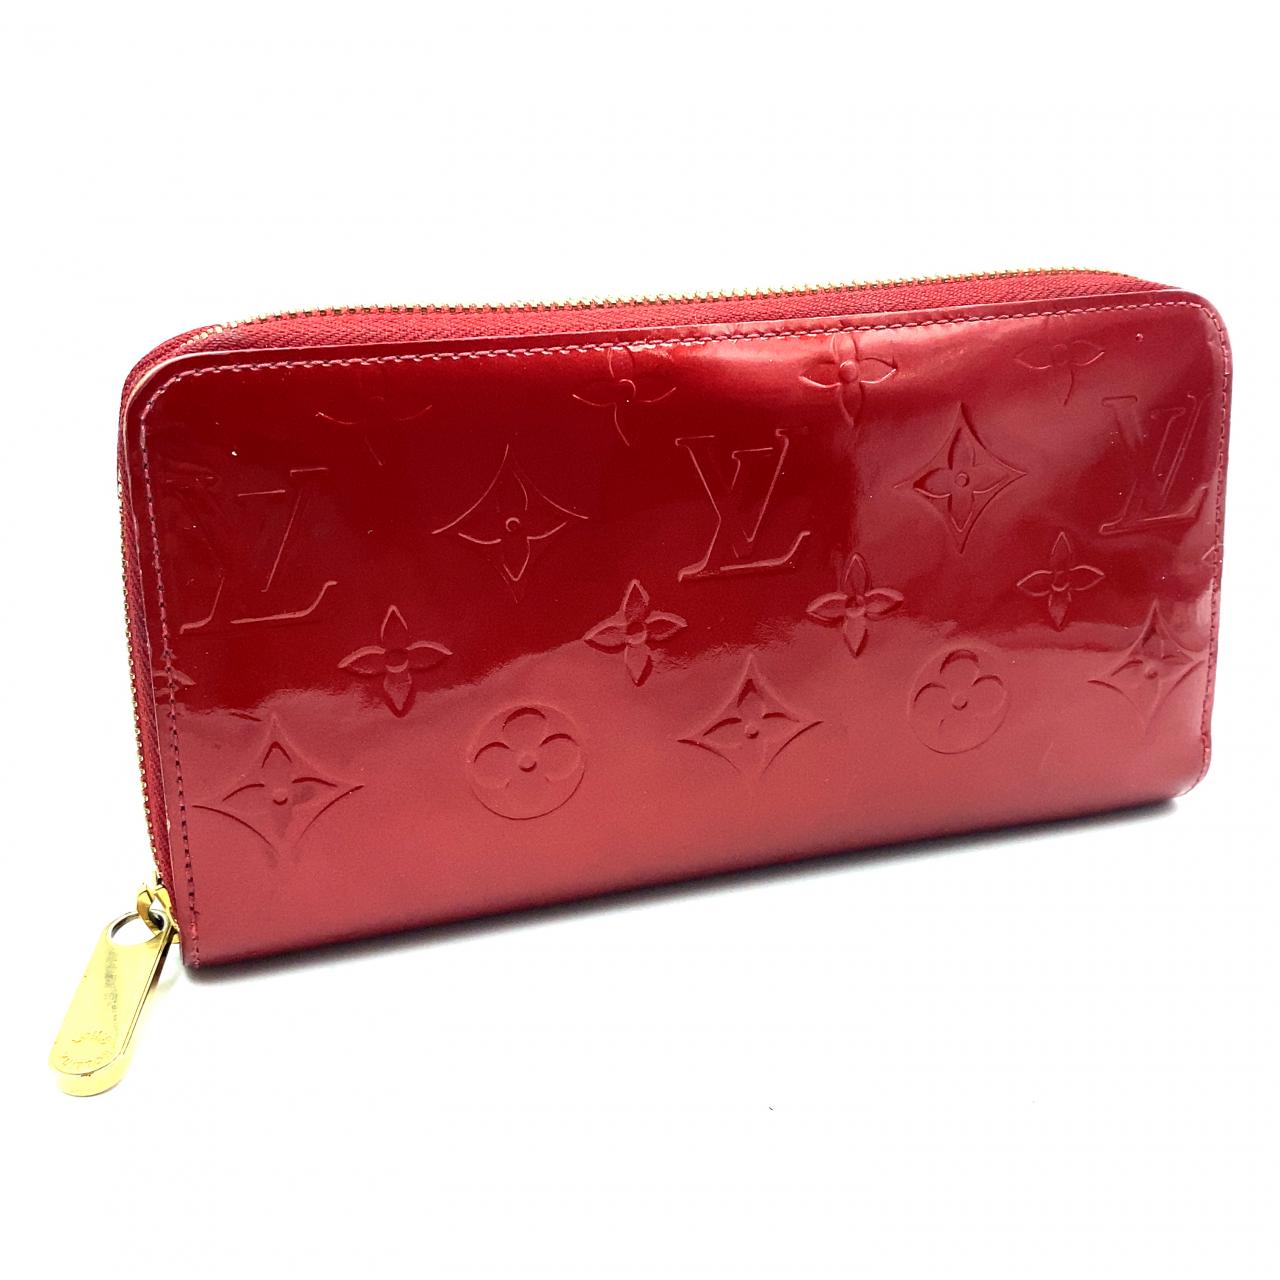 Authentic Pre-Owned Louis Vuitton Vernis Long Wallet in Plum Patent - Ruby  Lane